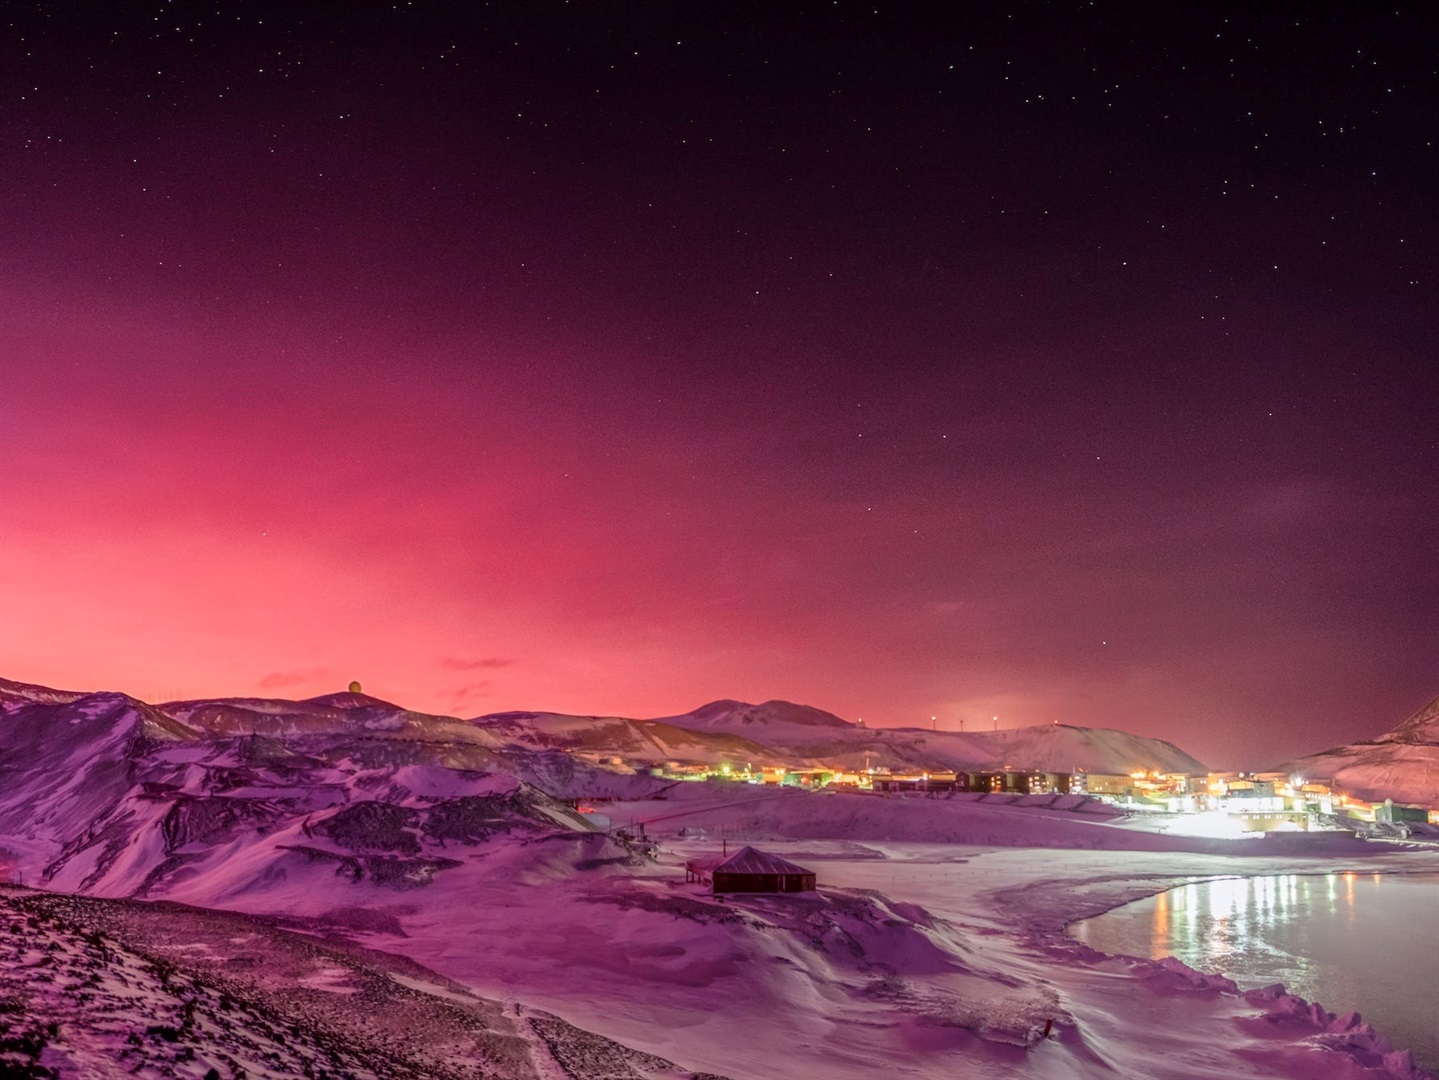 Aerosols from the January Tongan eruption likely turned the sky pink in Antarctica. This photo shows the Scott station.